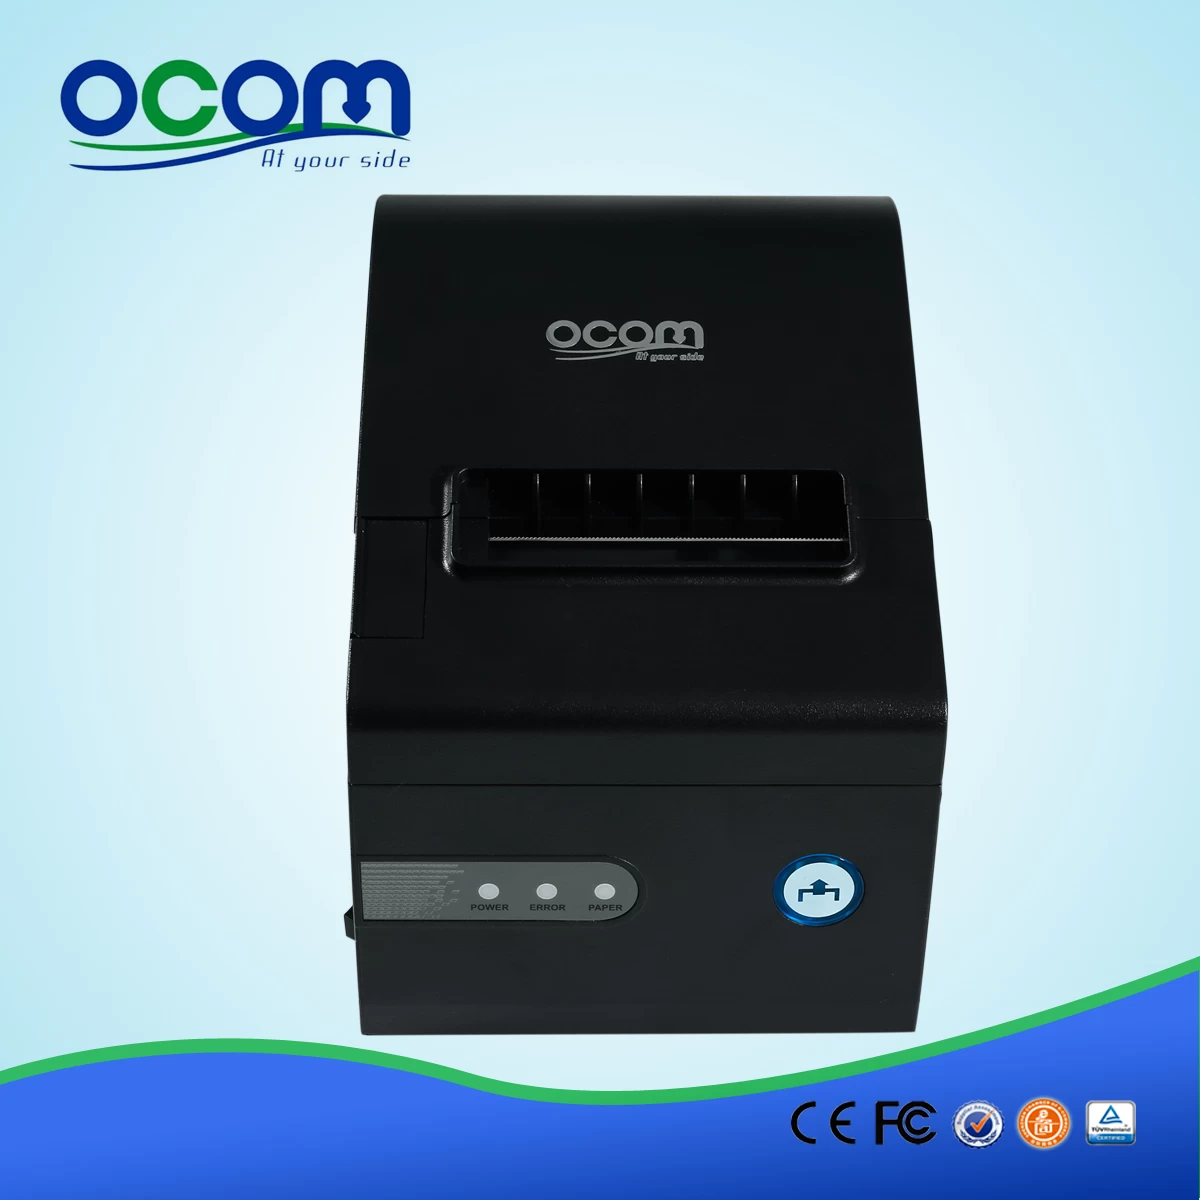 80mm High Quality Thermal Receipt Printer with auto cutter